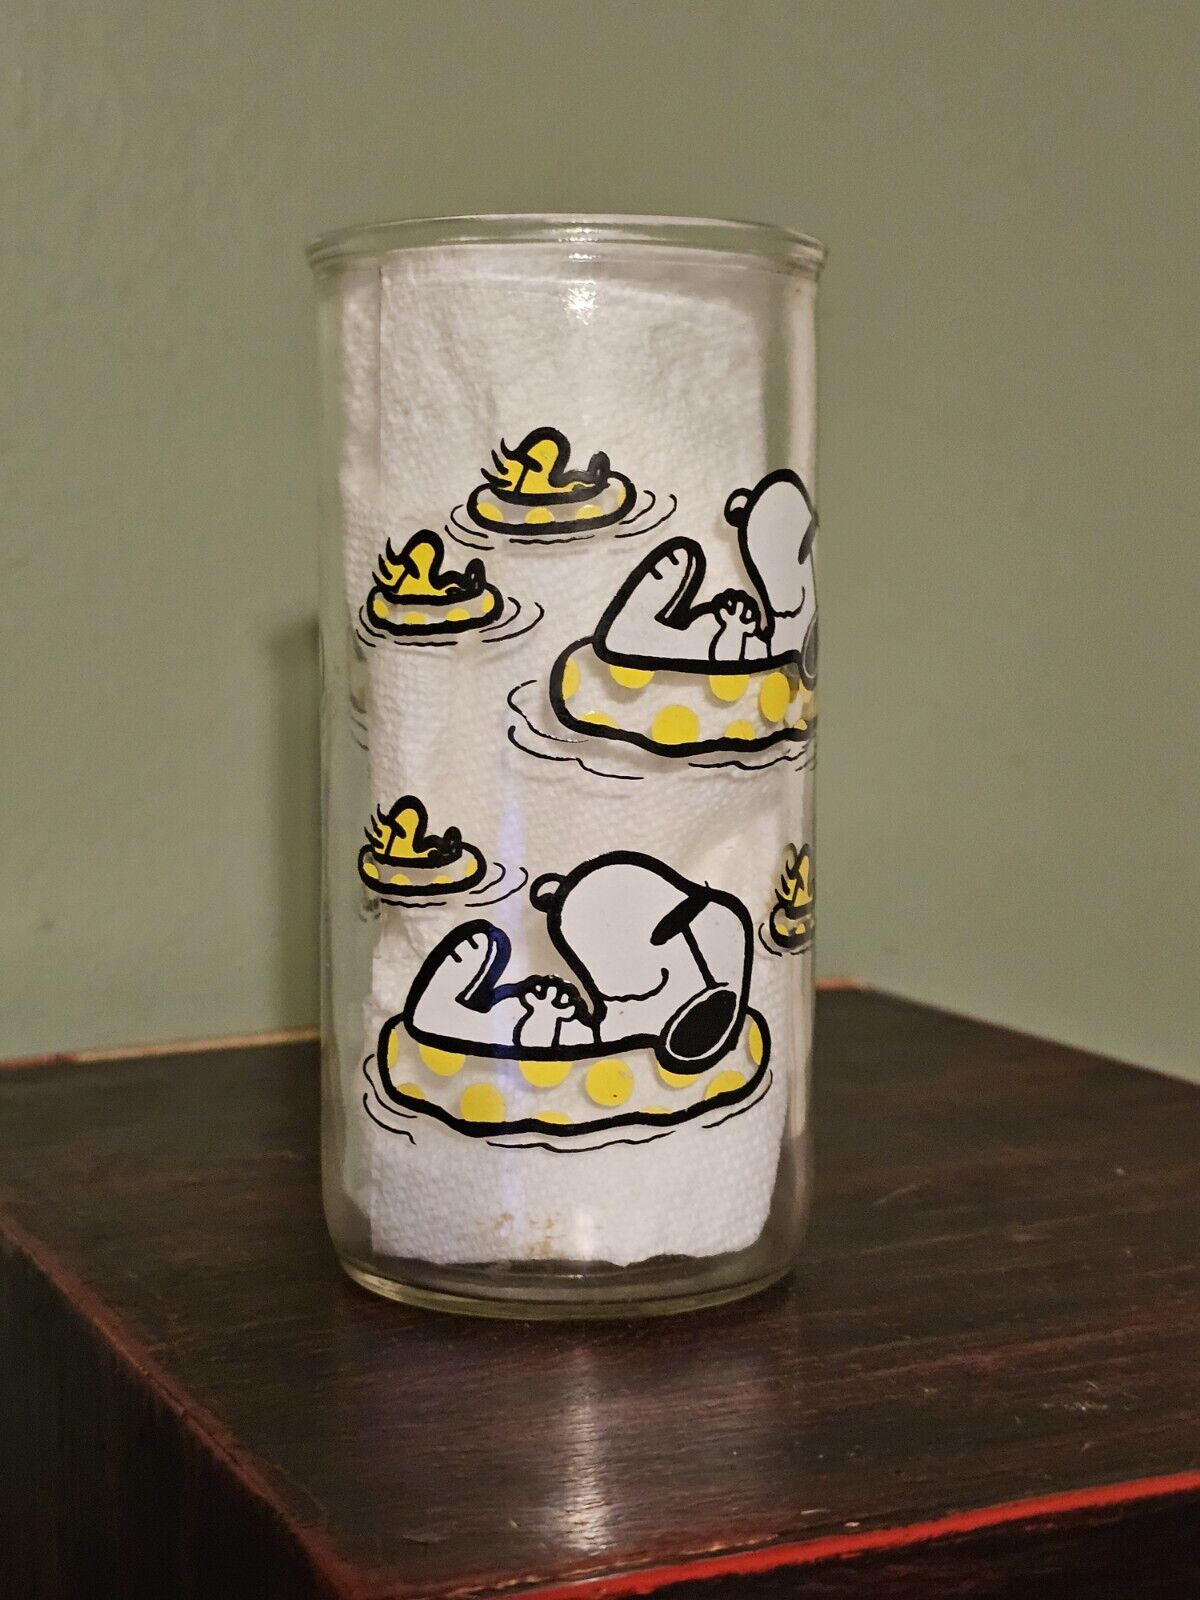 Vintage Promotional Peanuts Drinking Glass Snoopy and Woodstock c 1958, 1965